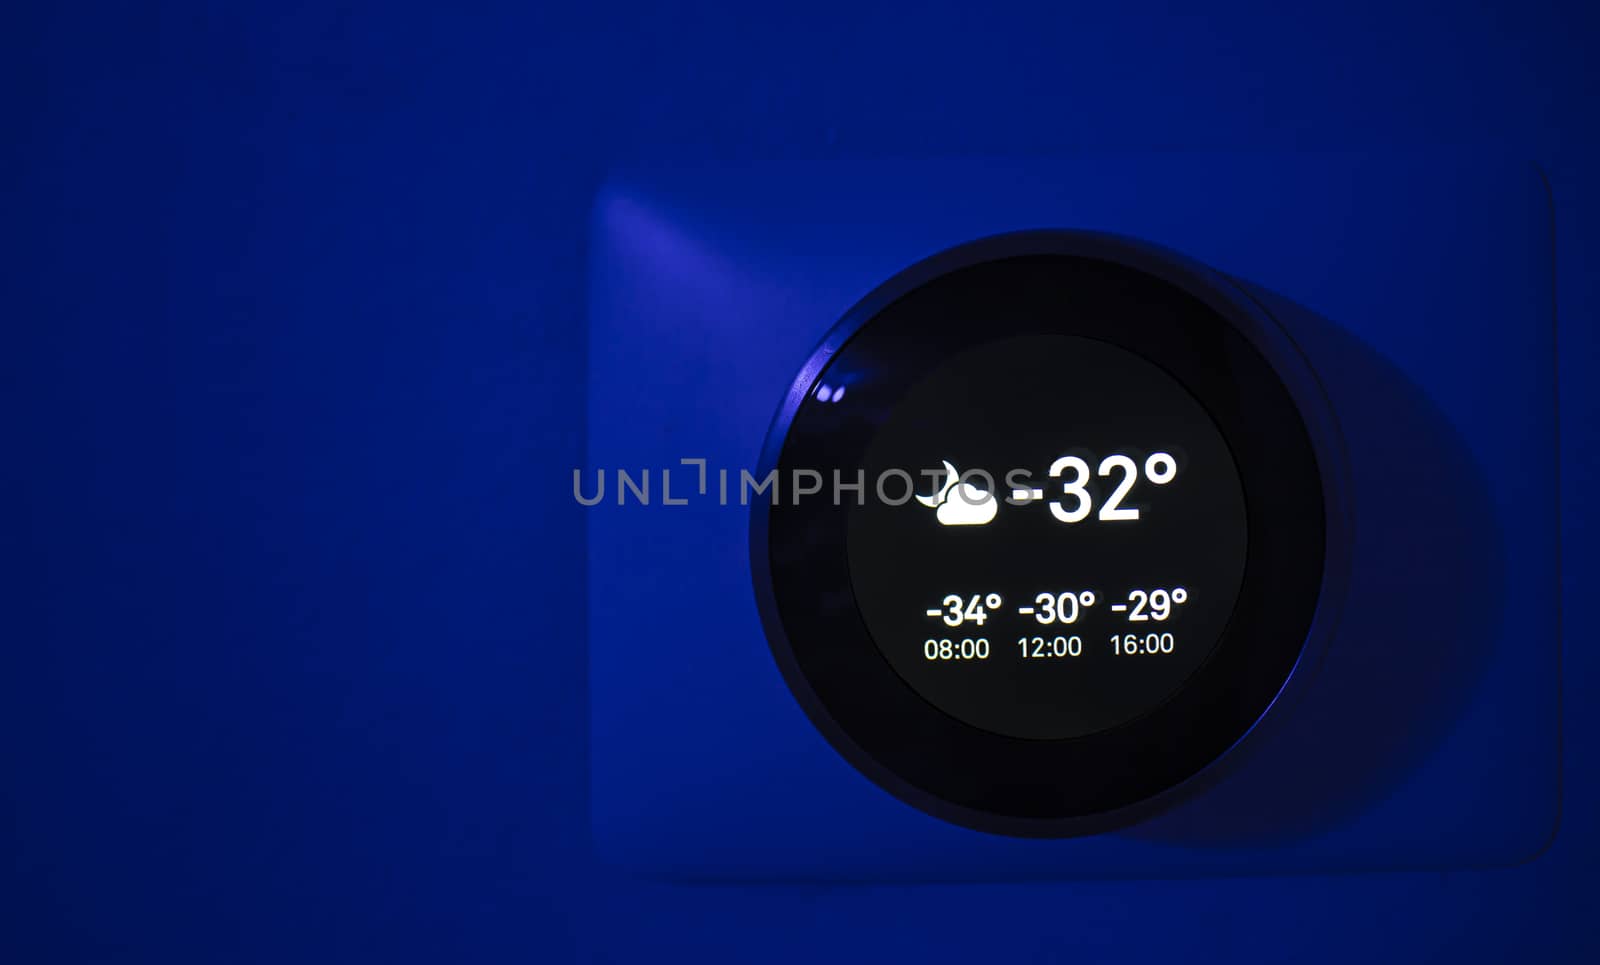 Digital Thermostat at night showing the outside temperature of -31 degrees celsius during the winter